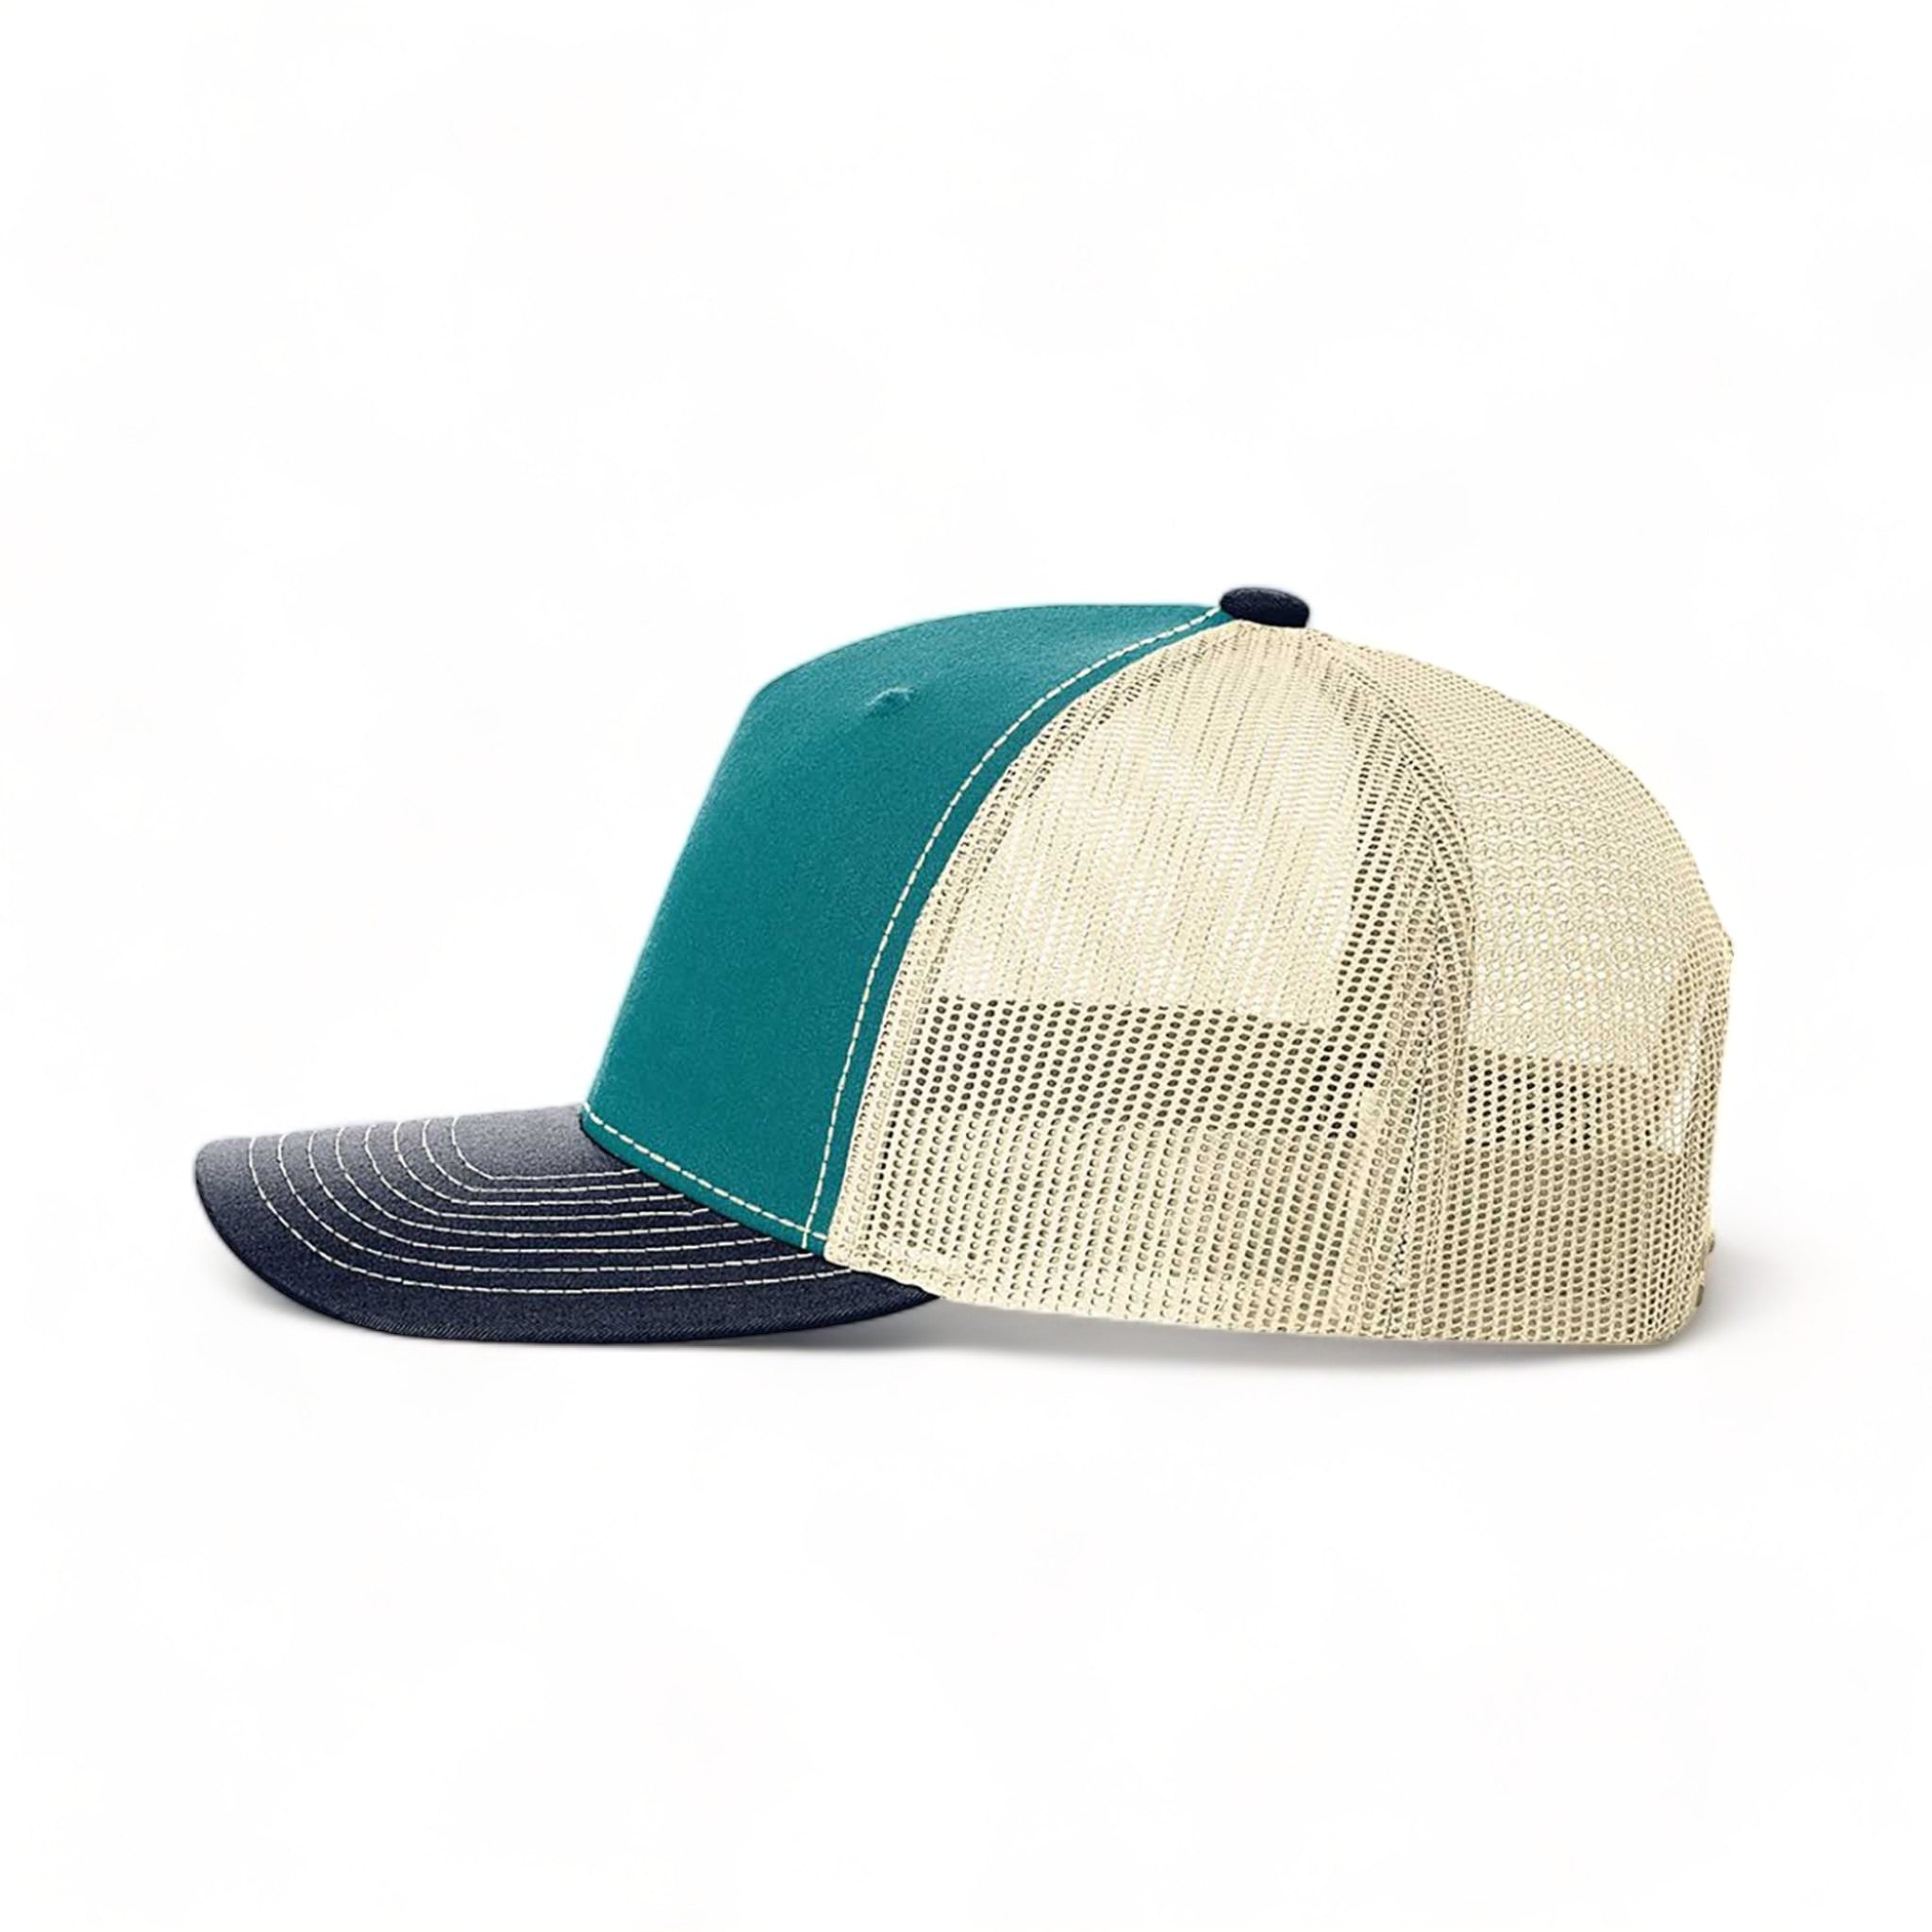 Side view of Richardson 112FP custom hat in blue teal, birch and navy